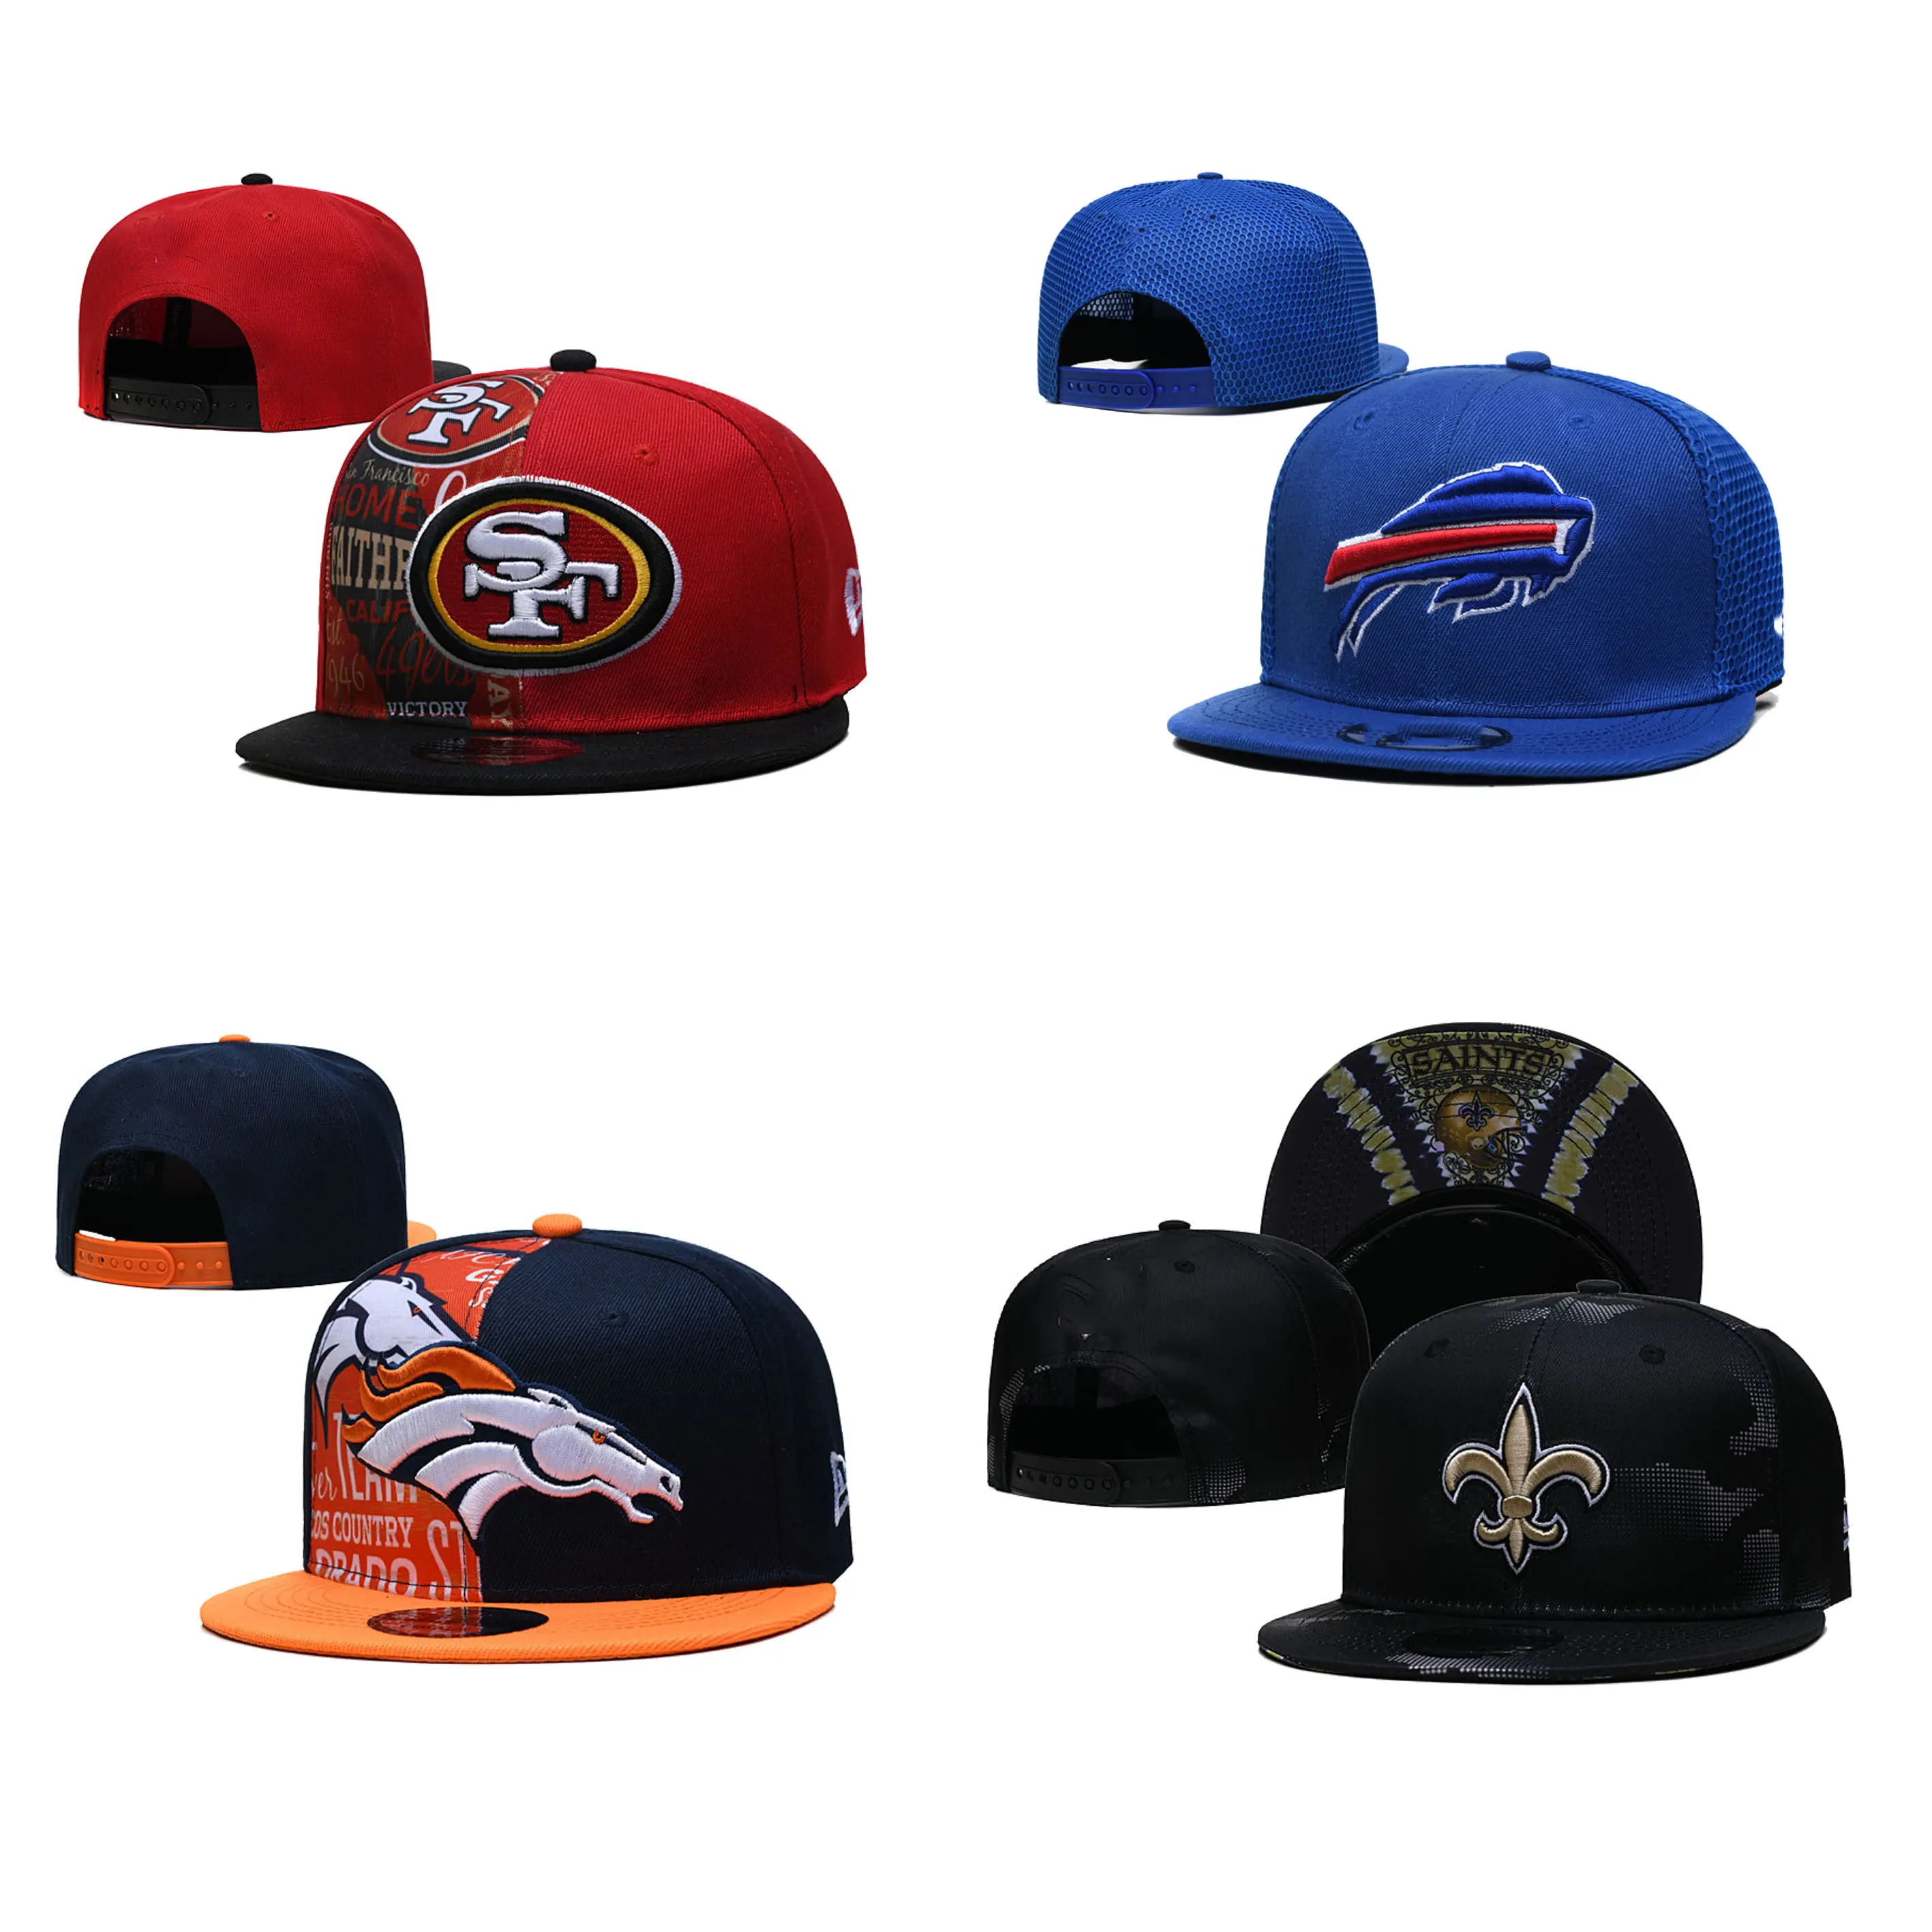 In stock High quality 3D embroidery caps American football snapback hats for 32 teams outdoor hat